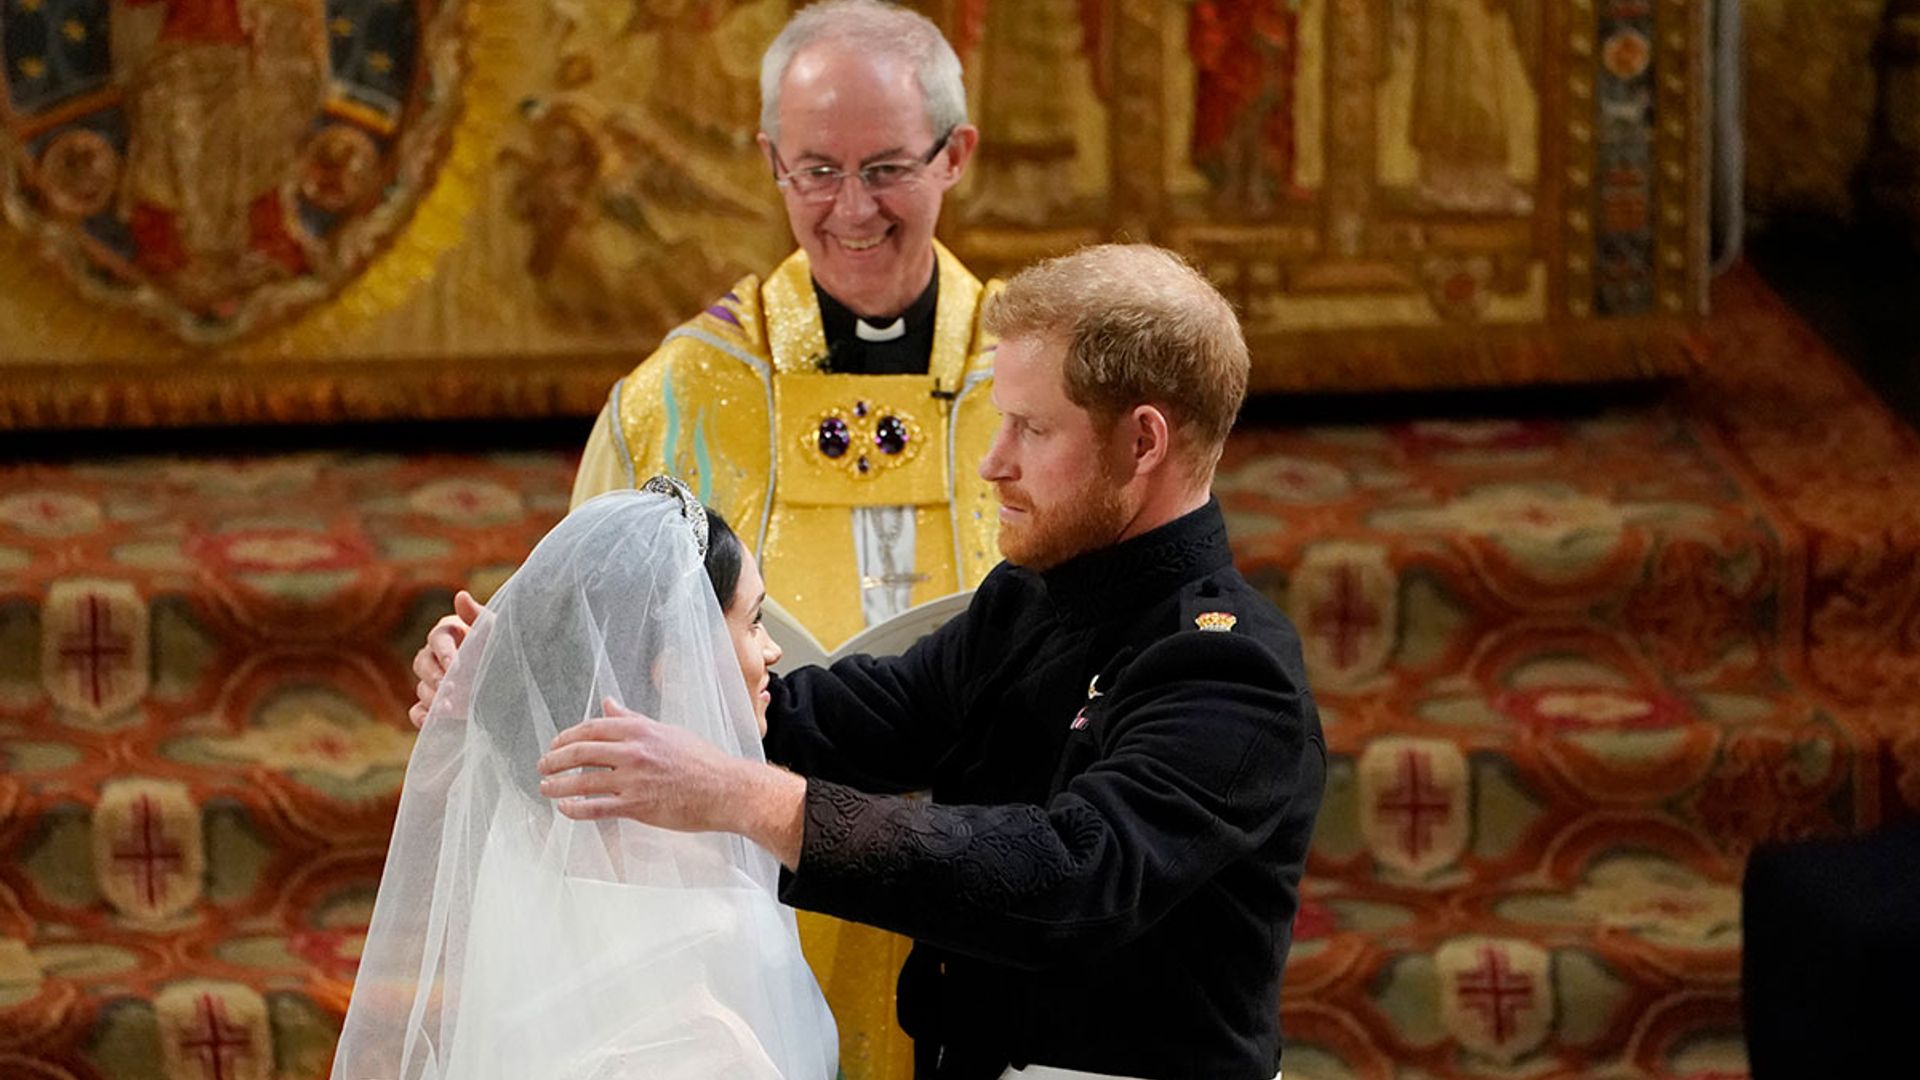 Prince Harry and Meghan Markle's wedding claim finally addressed by Archbishop of Canterbury